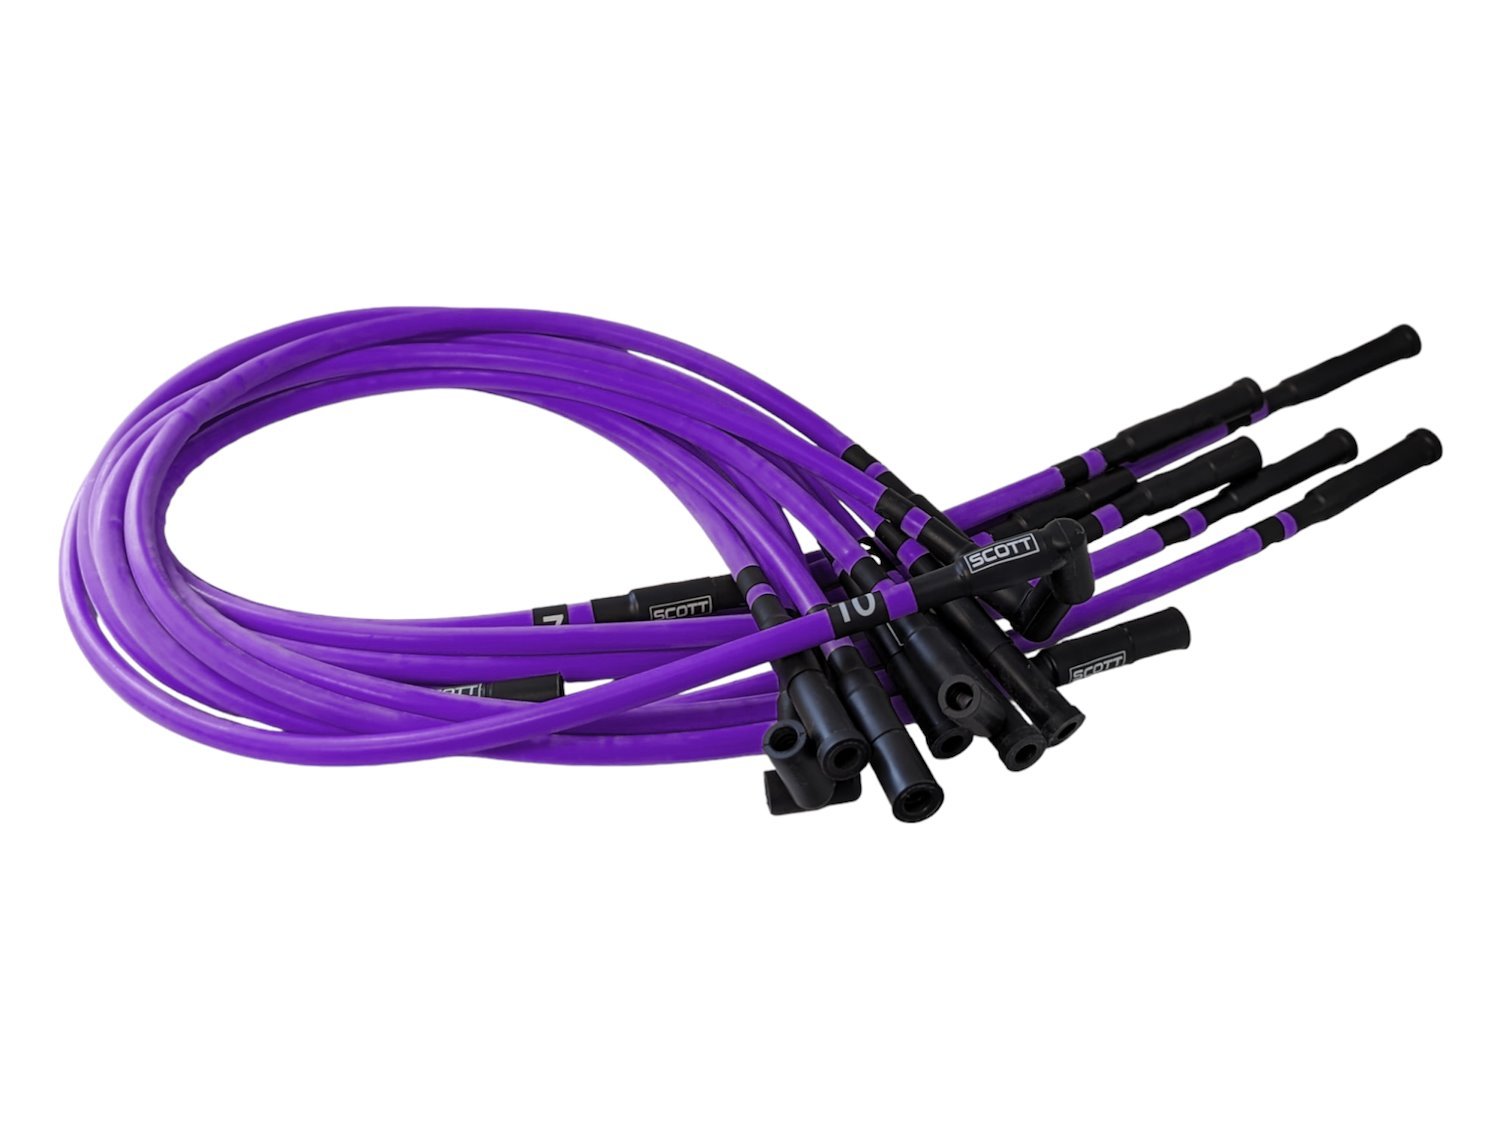 SPW-CH-690-I-6 High-Performance Silicone-Sleeved Spark Plug Wire Set for Dodge Viper (Gen-1) [Purple]